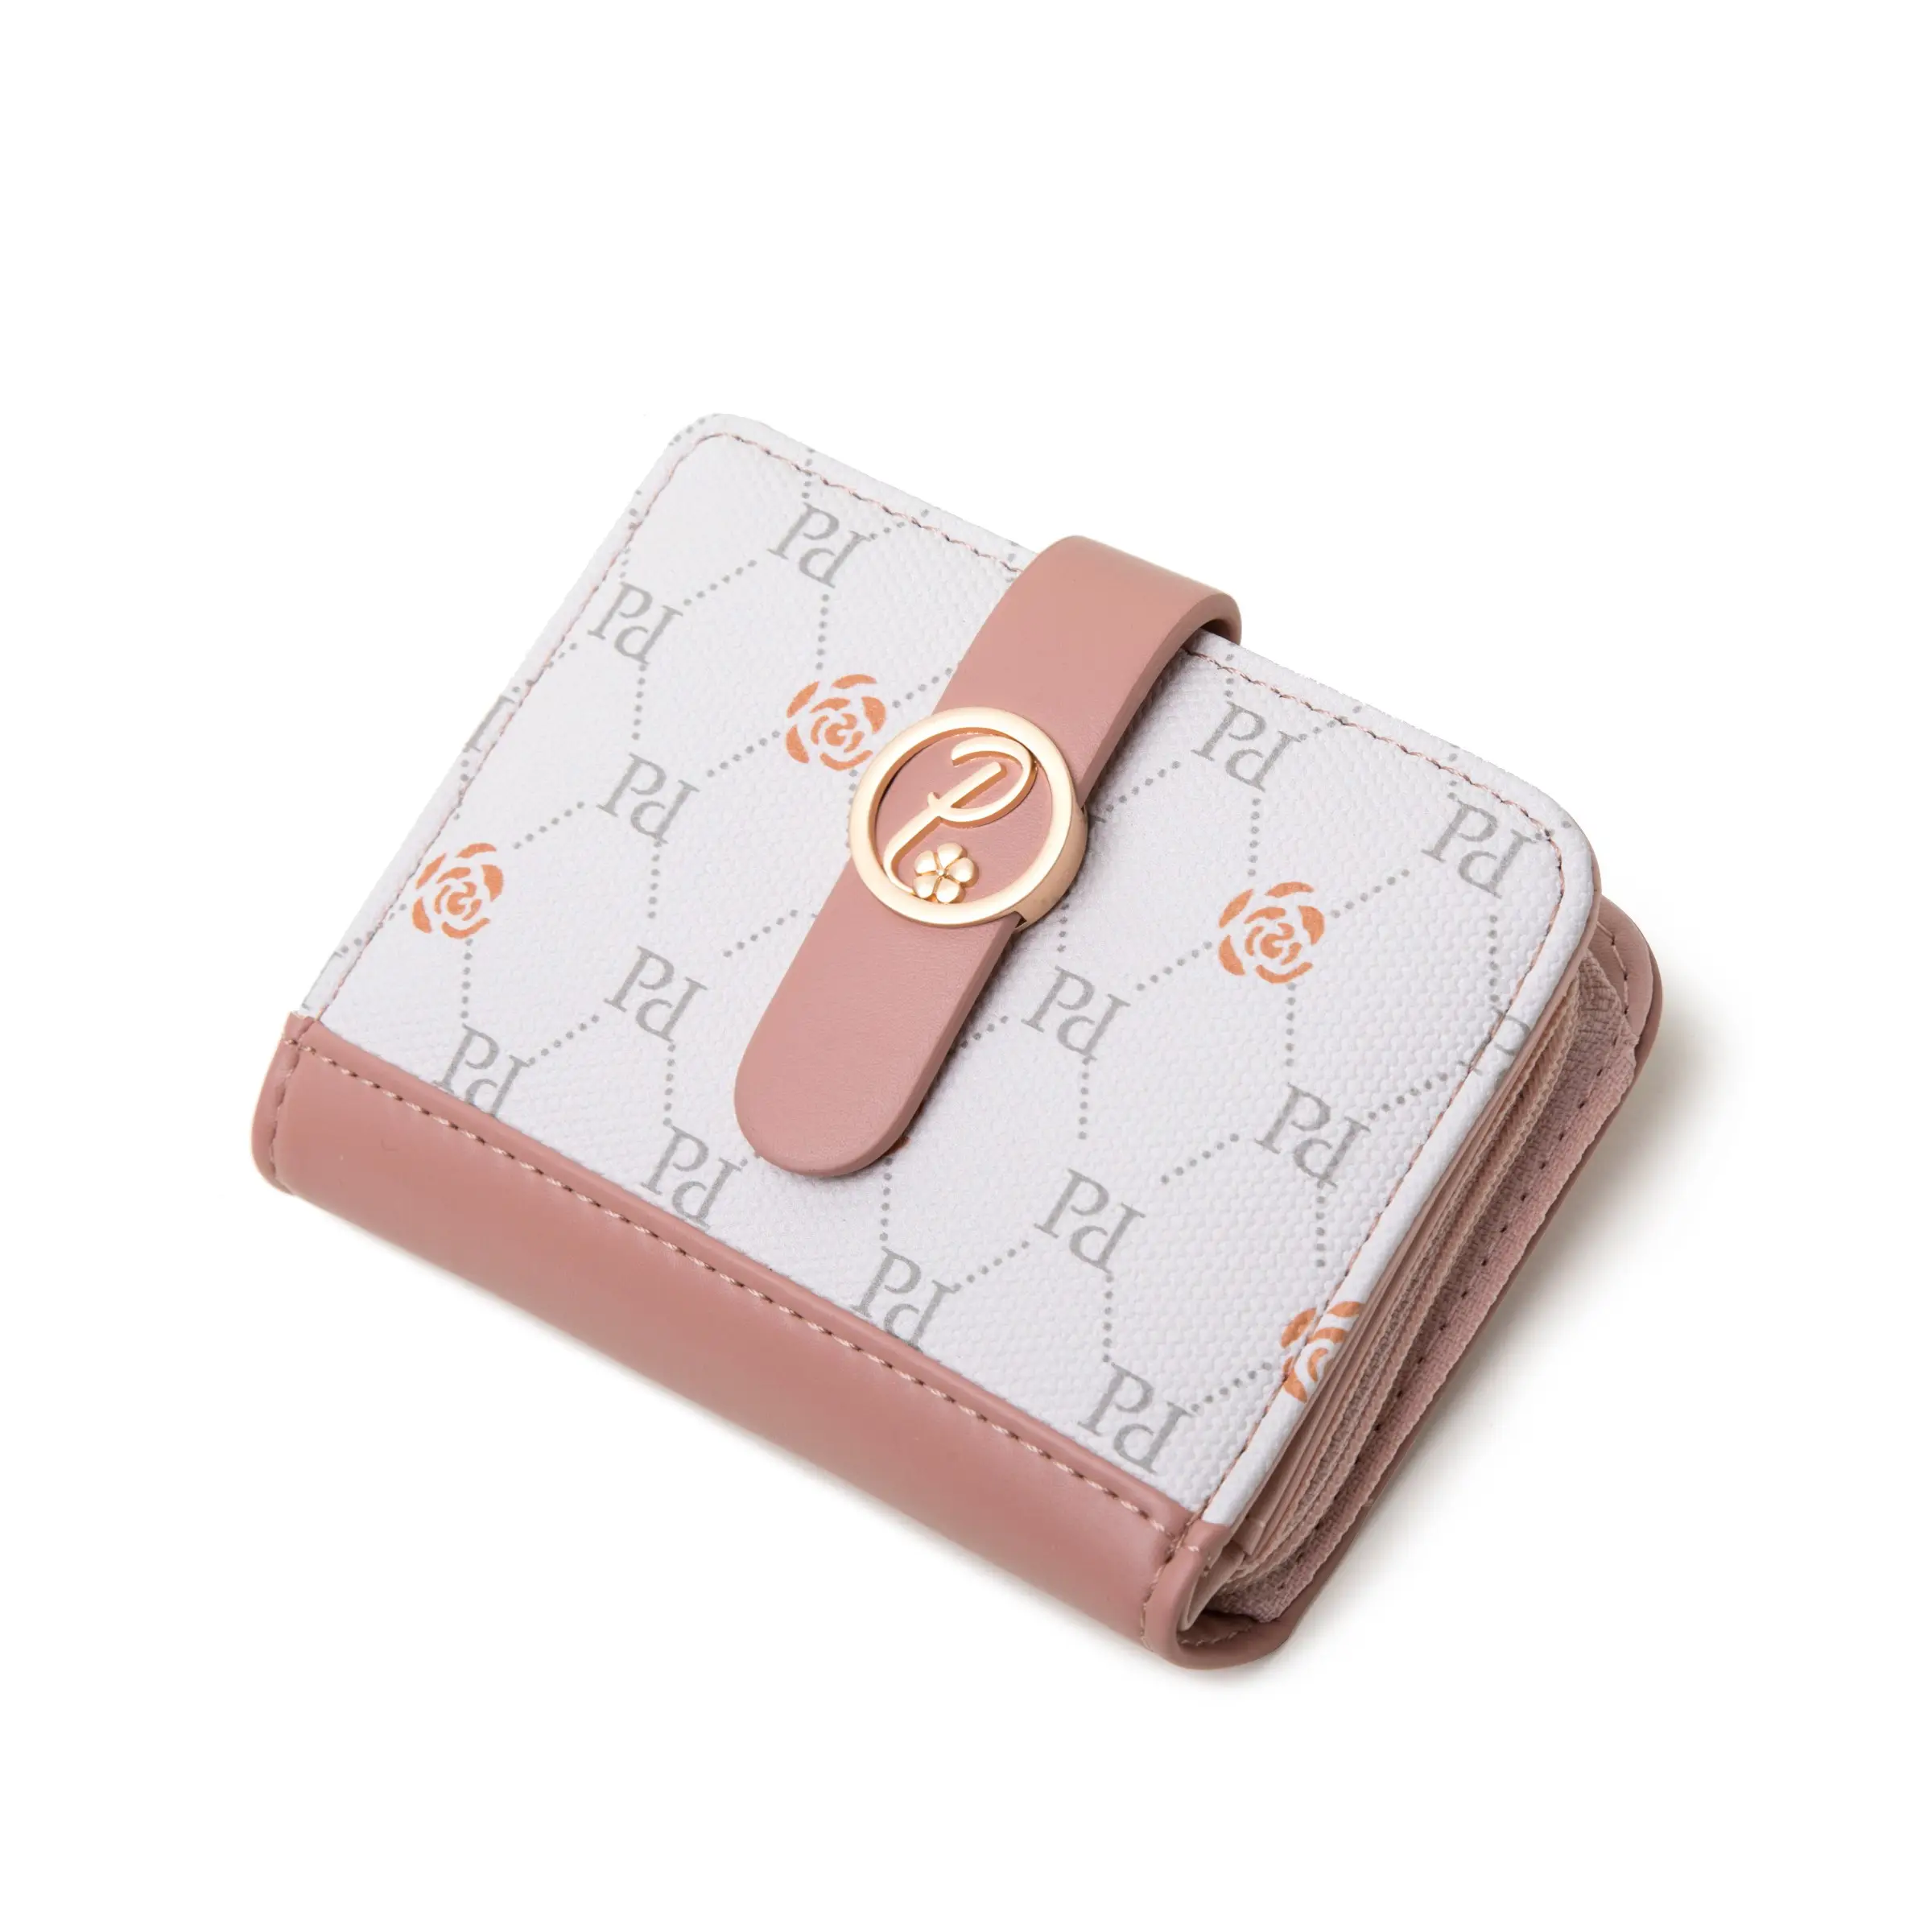 PRETTYZYS New Design Multi Card Case Wallet With Zipper Pocket Wallet Small Lady Purse For Wholesale With Flower Pattern